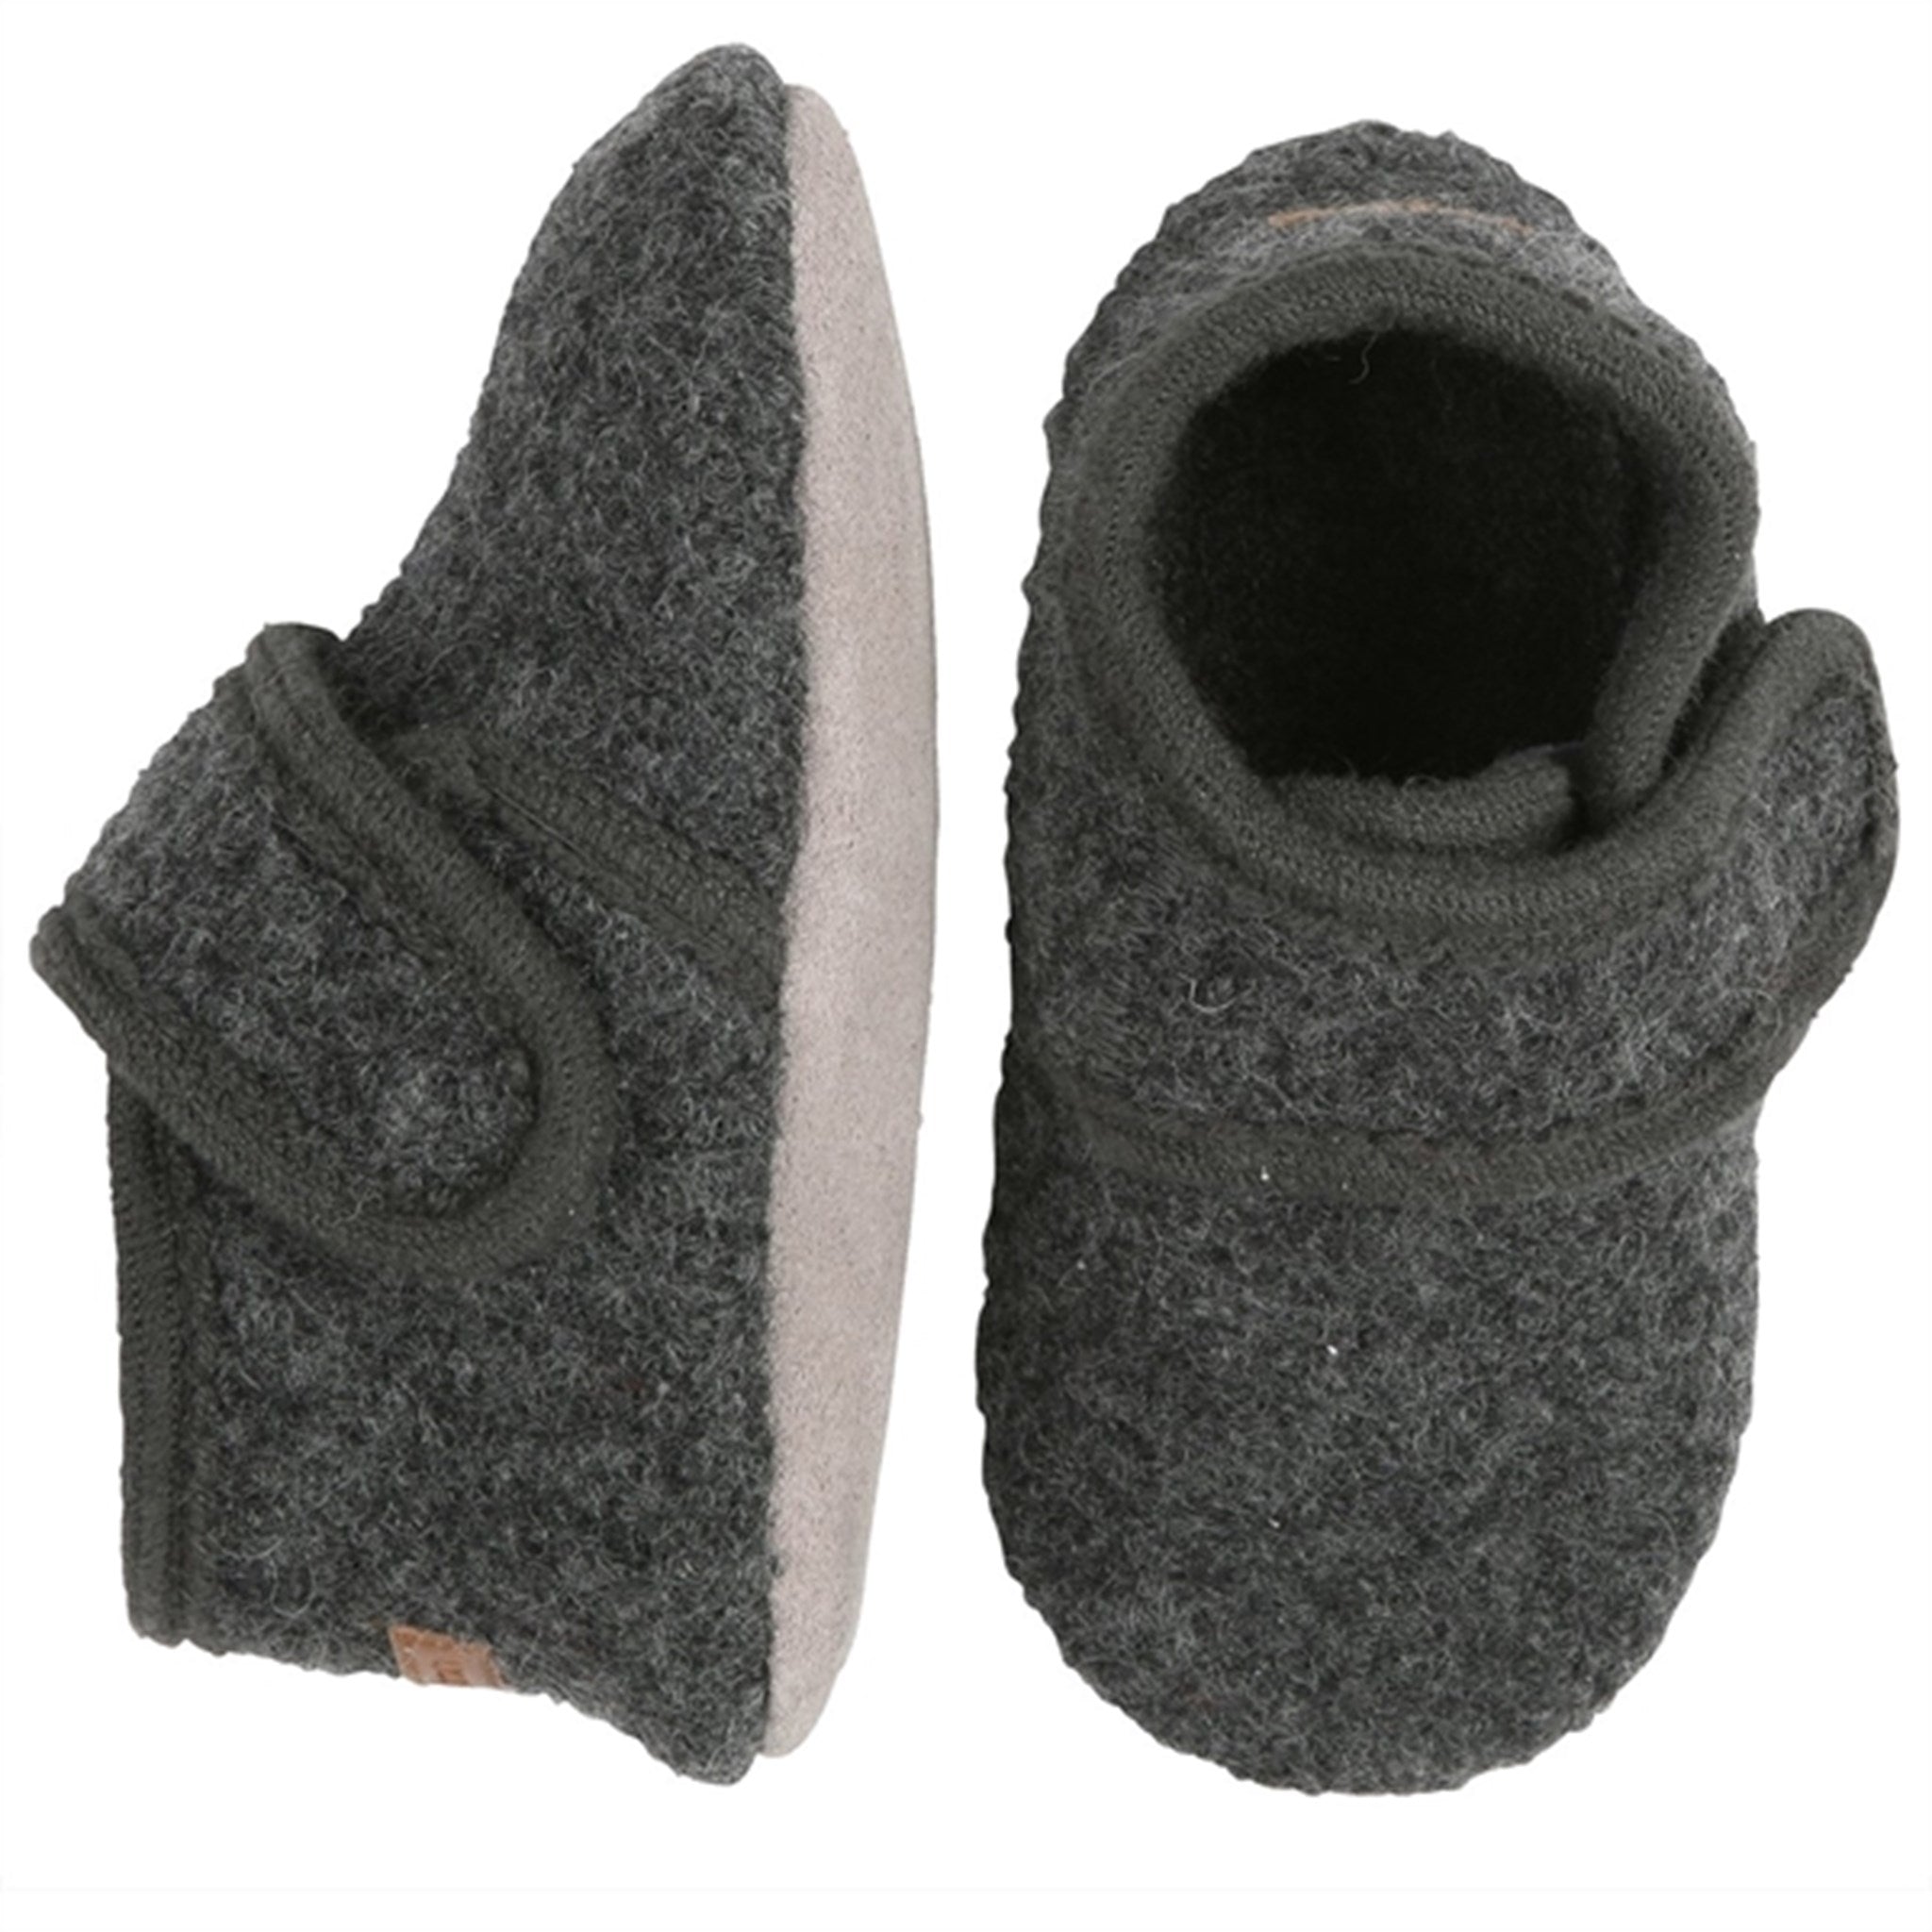 MELTON Wool Slippers Classic Antracite